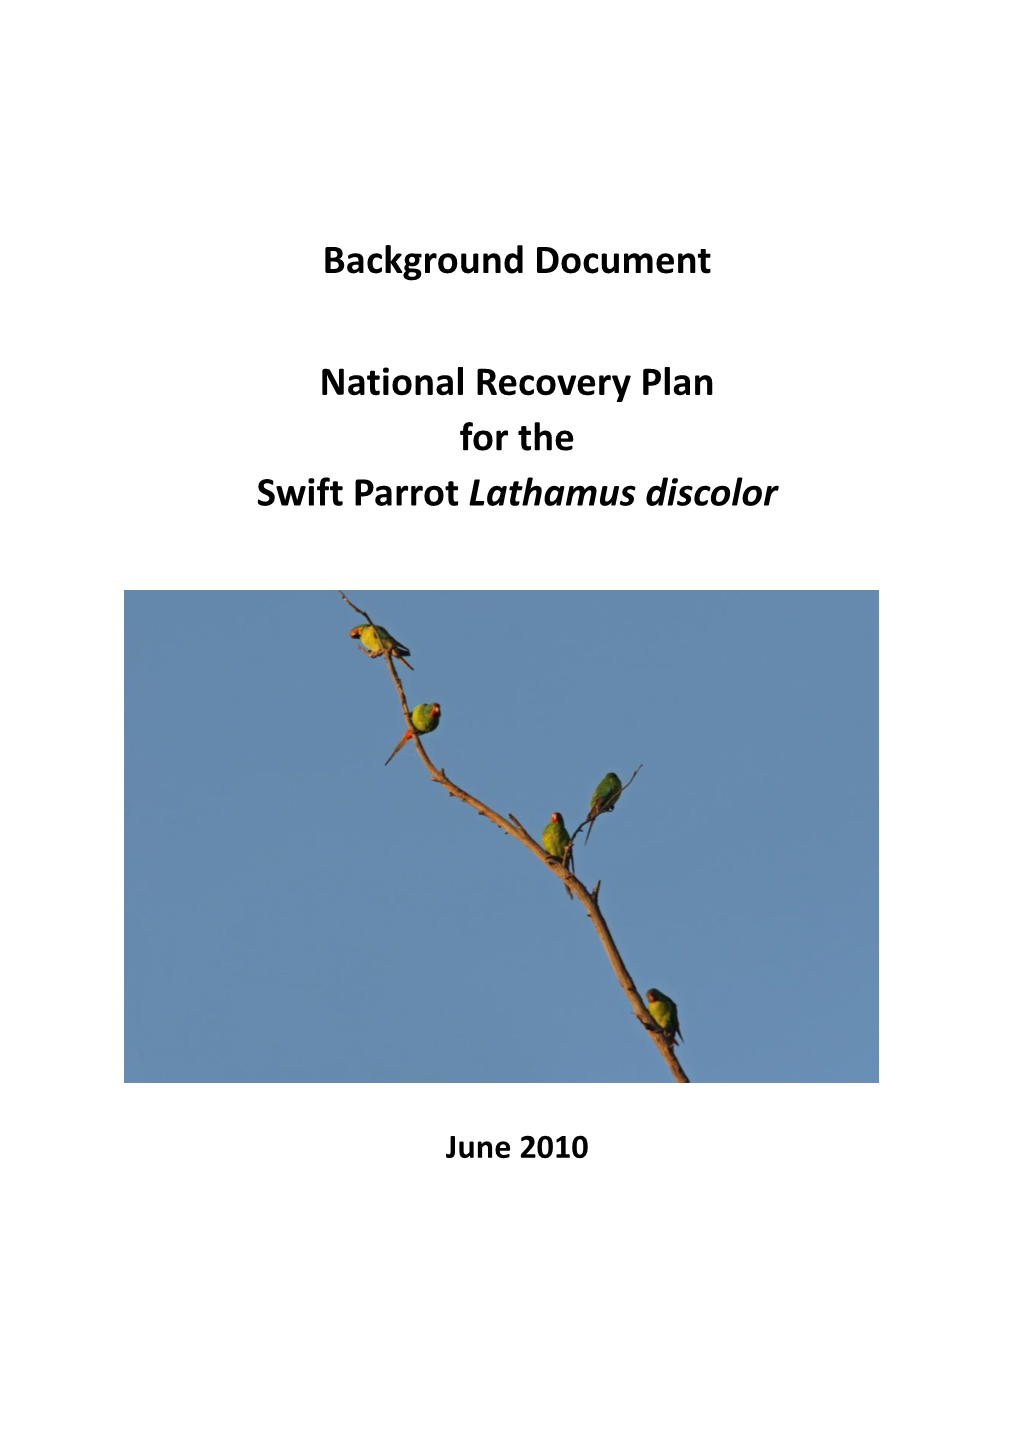 Background Document National Recovery Plan for the Swift Parrot